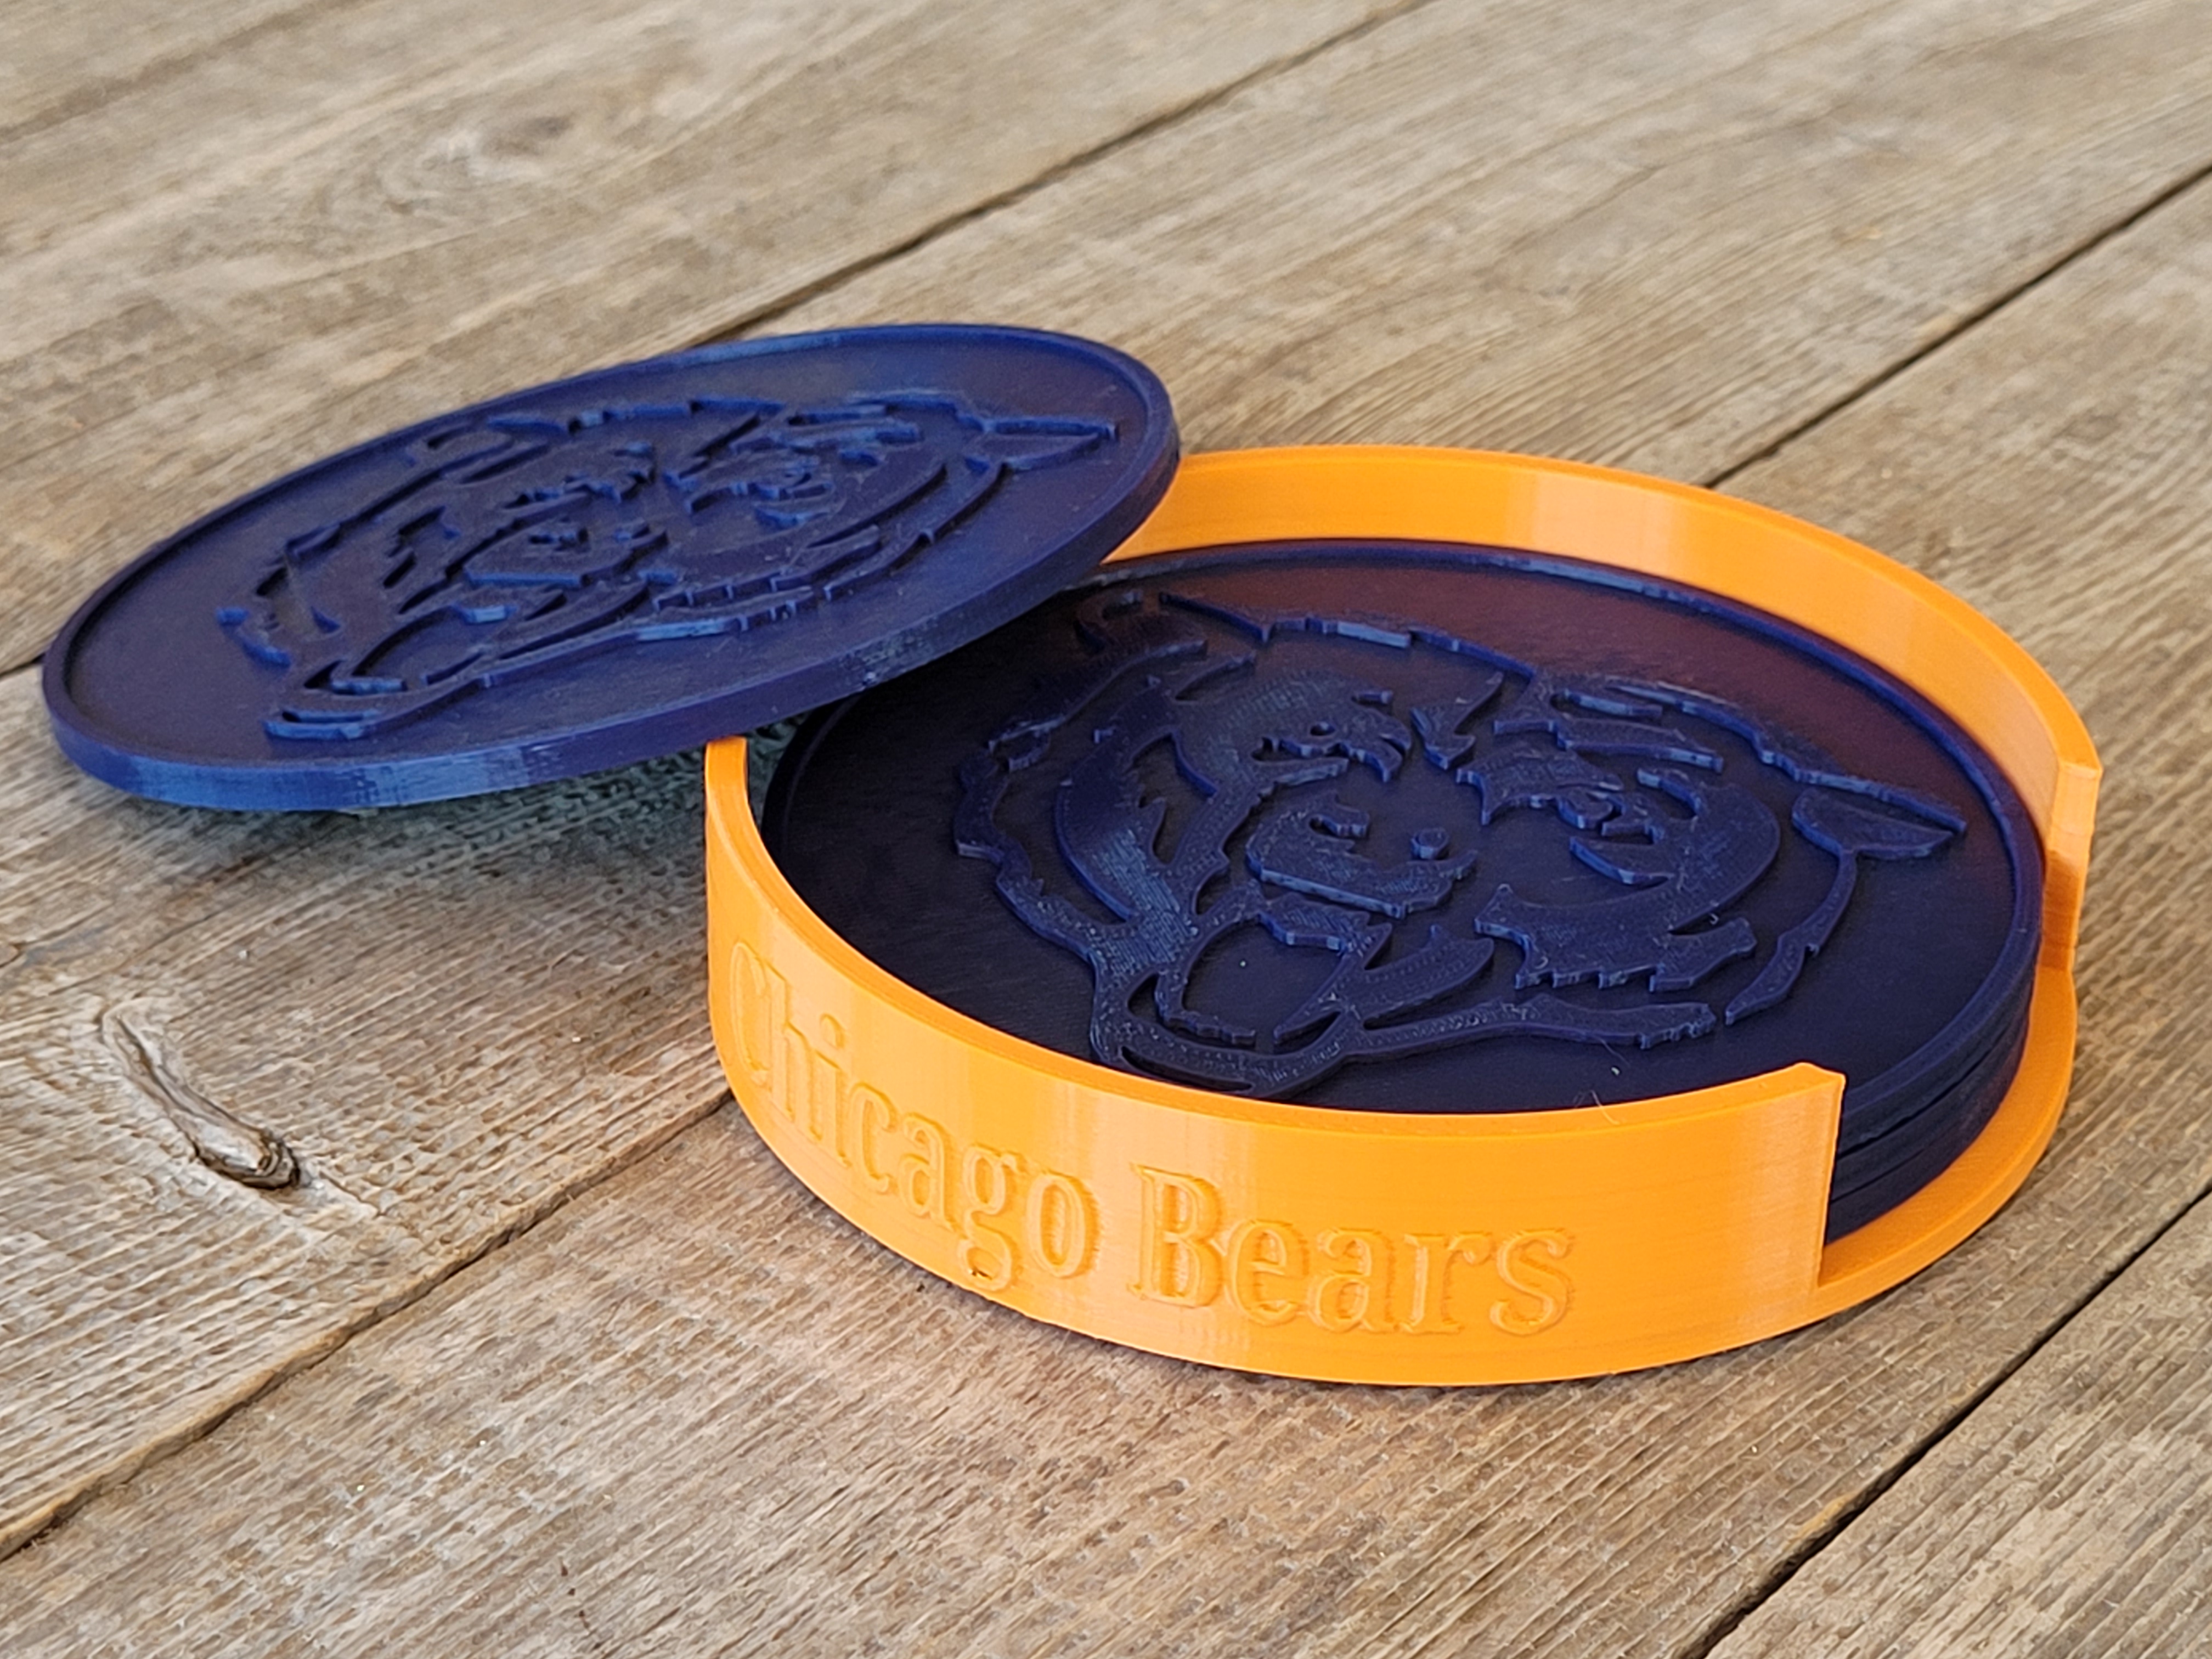 Chicago Bears Coaster and holder